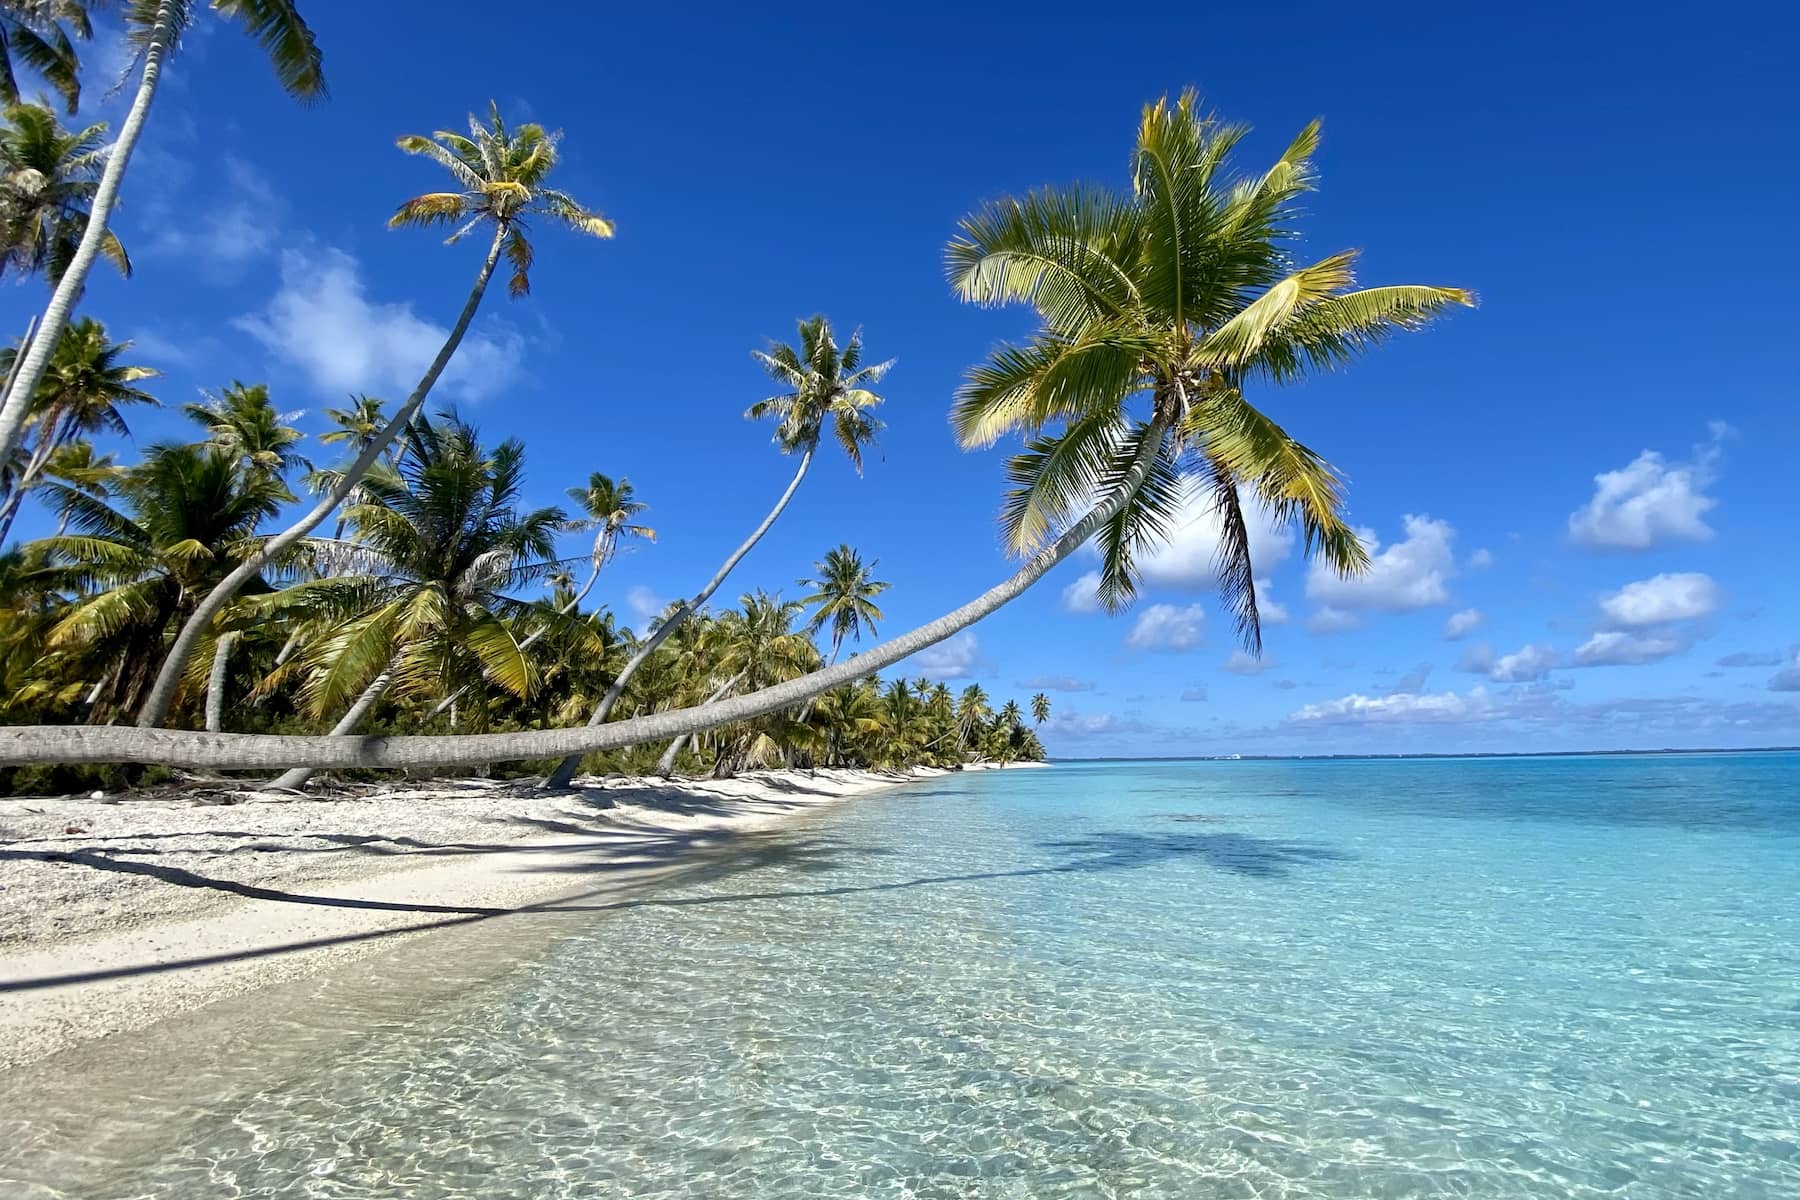 A view of the famous PK9 beach in Fakarava, French Polynesia